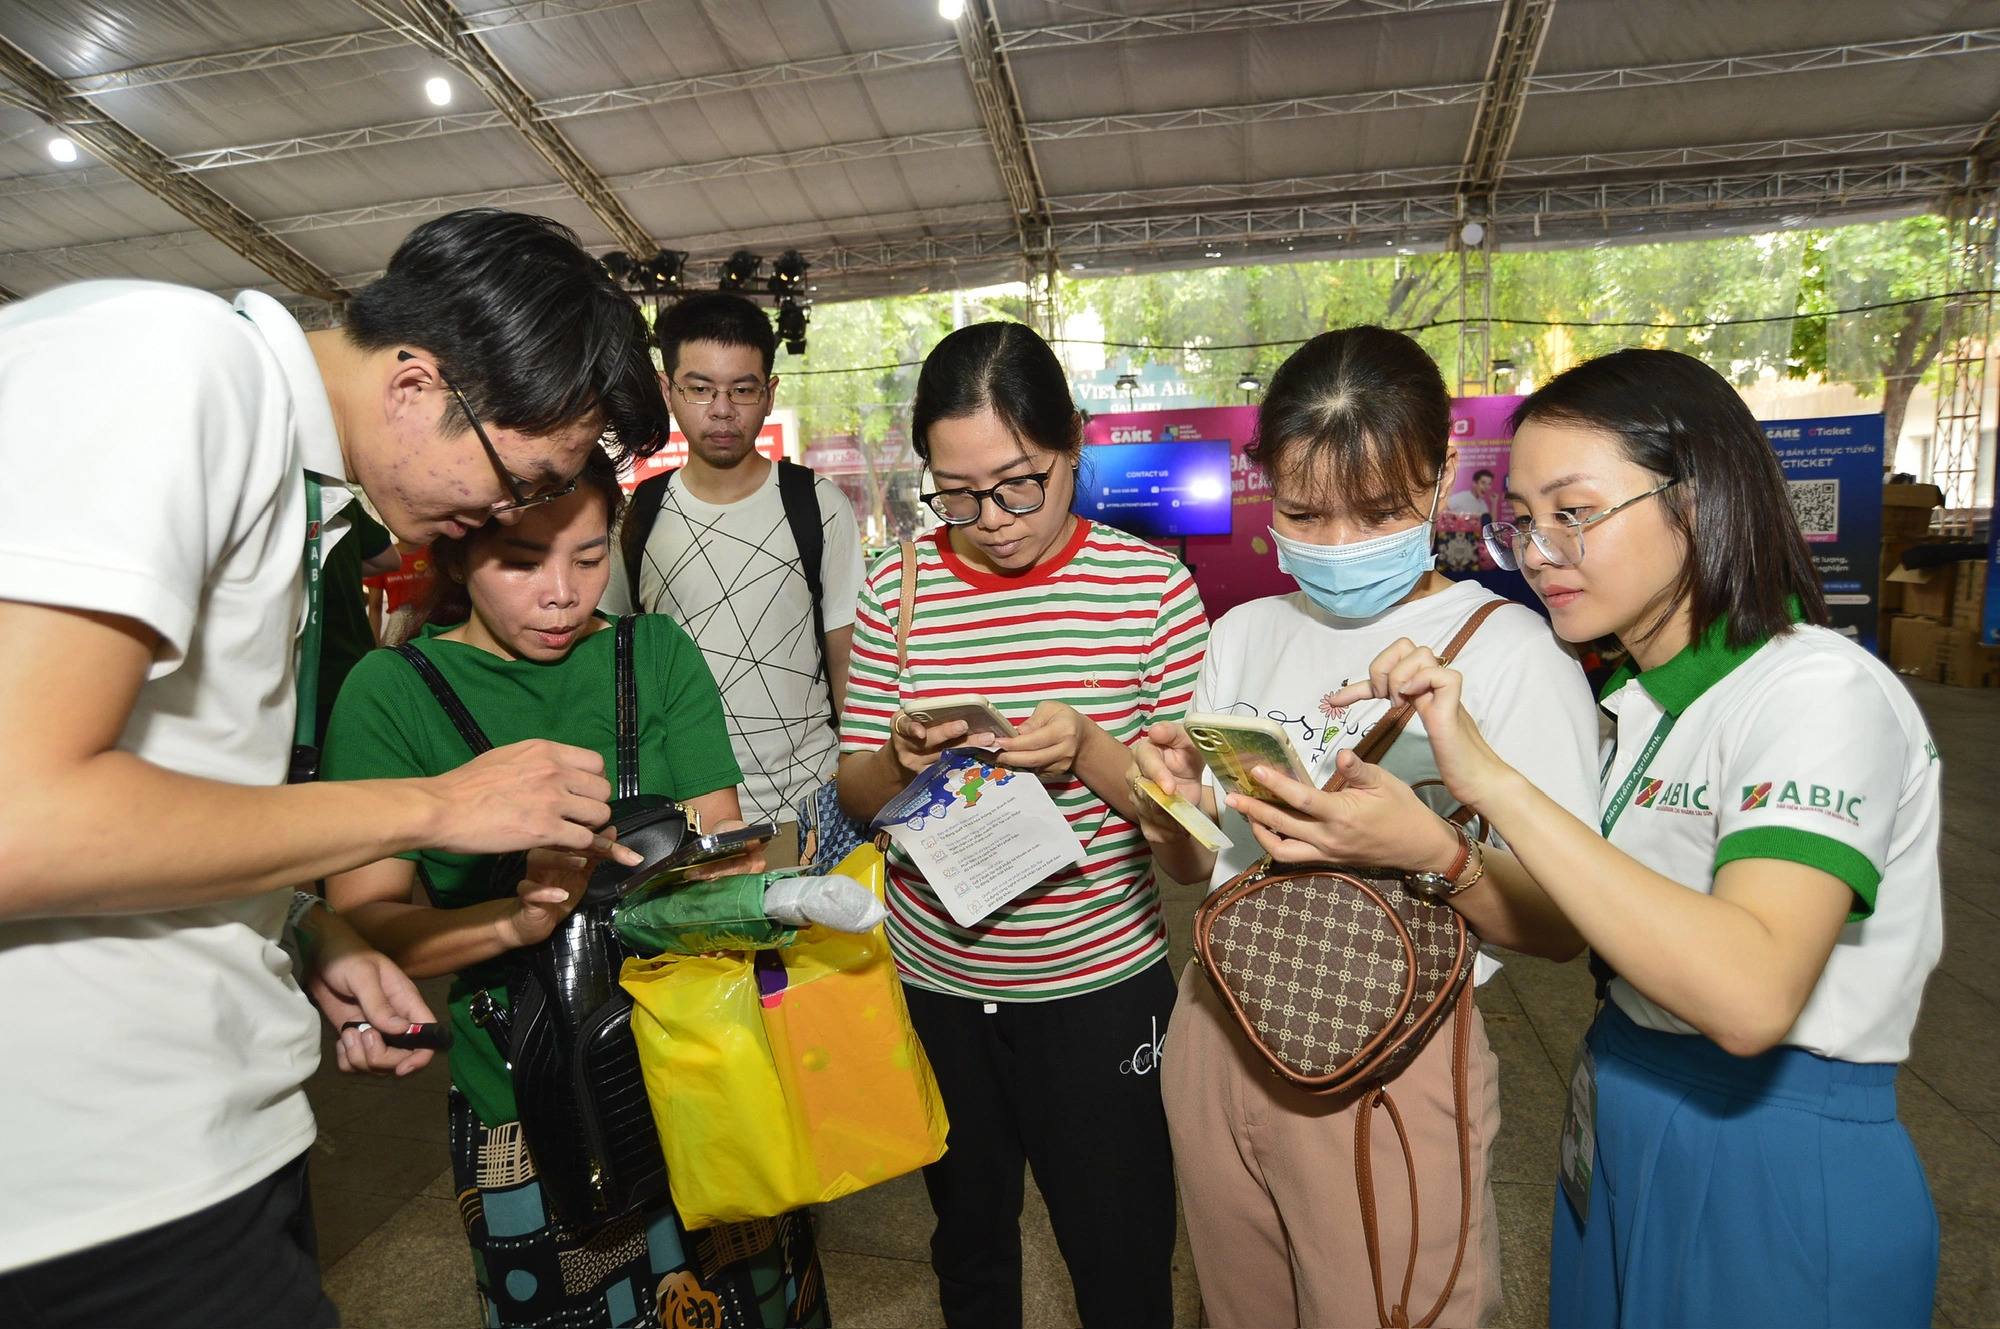 Festival-goers can get detailed and comprehensible information about products and services of participating banks by touring the festival. Photo: Quang Dinh / Tuoi Tre